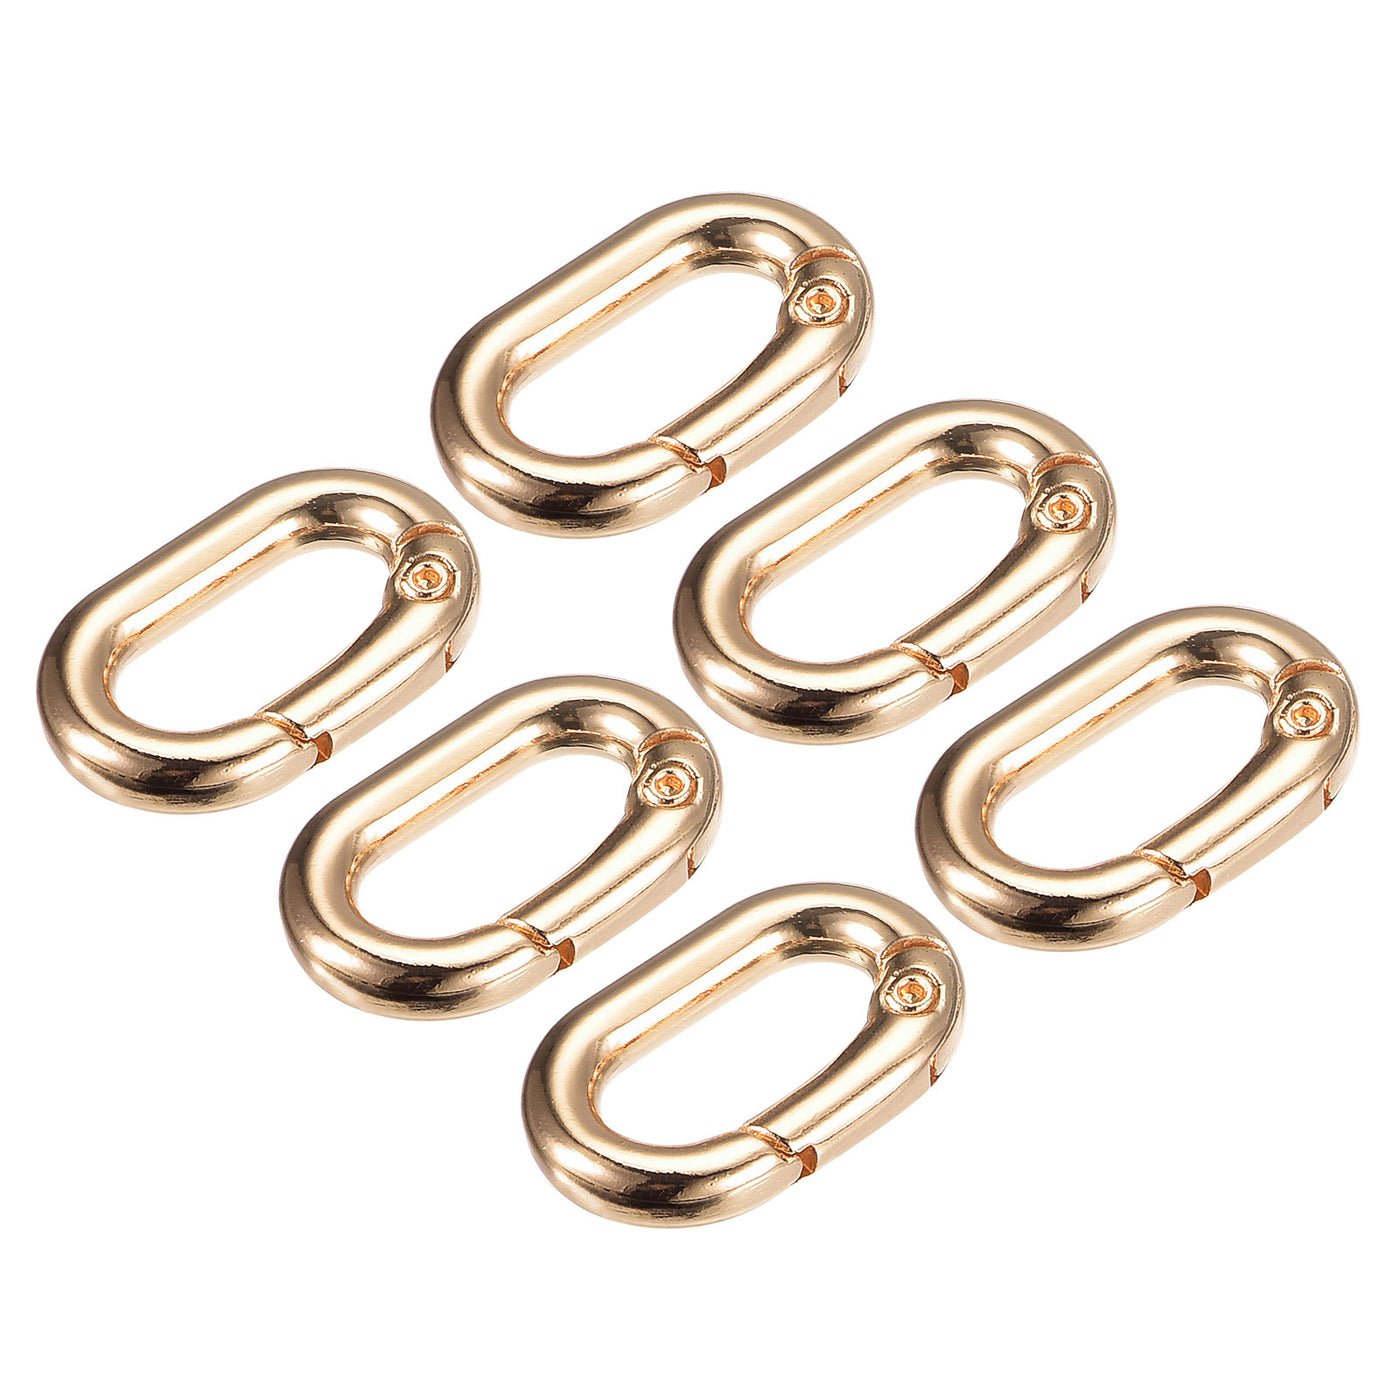 uxcell Uxcell 0.98" Spring Oval Ring Snap Clip Trigger for Bag Purse Keychain, 6Pcs Gold